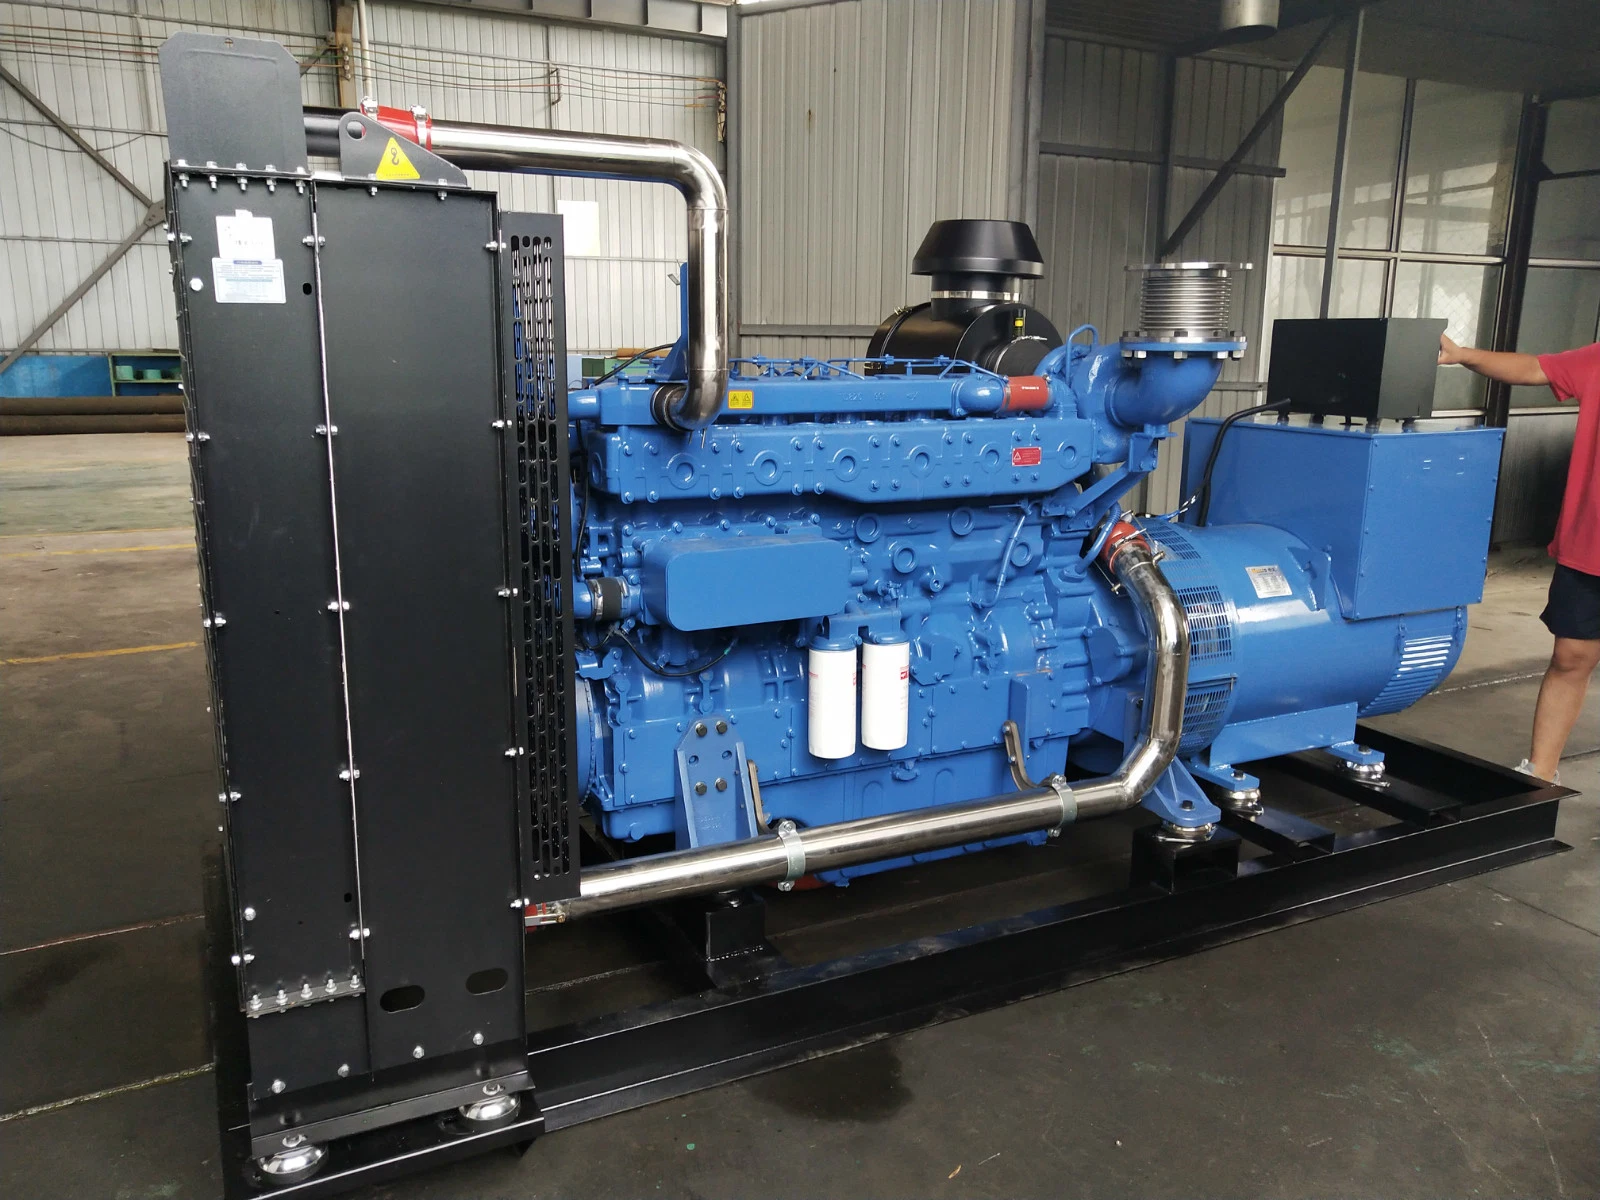 Silent Genset 12 Kw 15 kVA Single 1 Phase 230 V Volts Electric Generator Diesel Power by Yuchai Engine